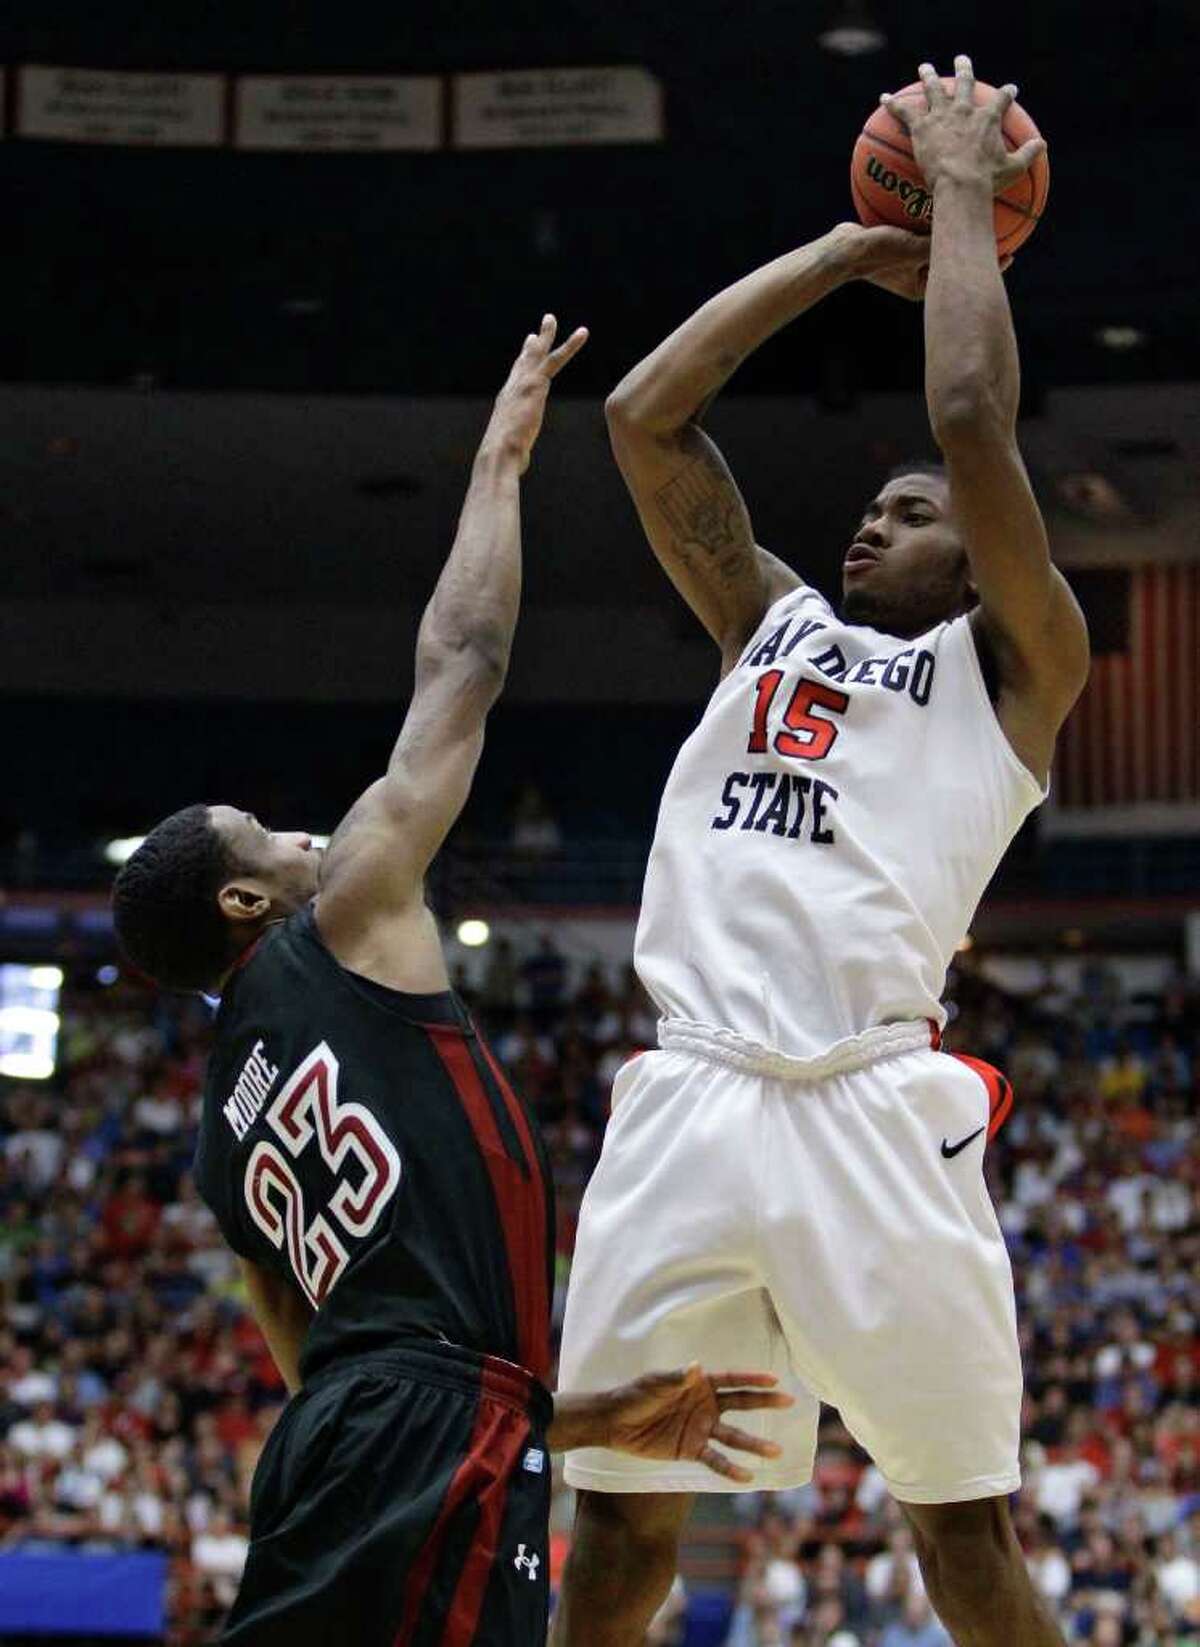 San Diego State's Kawhi Leonard (15) shoots over Temple's Ramone Moore (23) during a West Regional NCAA college basketball tournament third round game Saturday, March 19, 2011, in Tucson, Ariz.